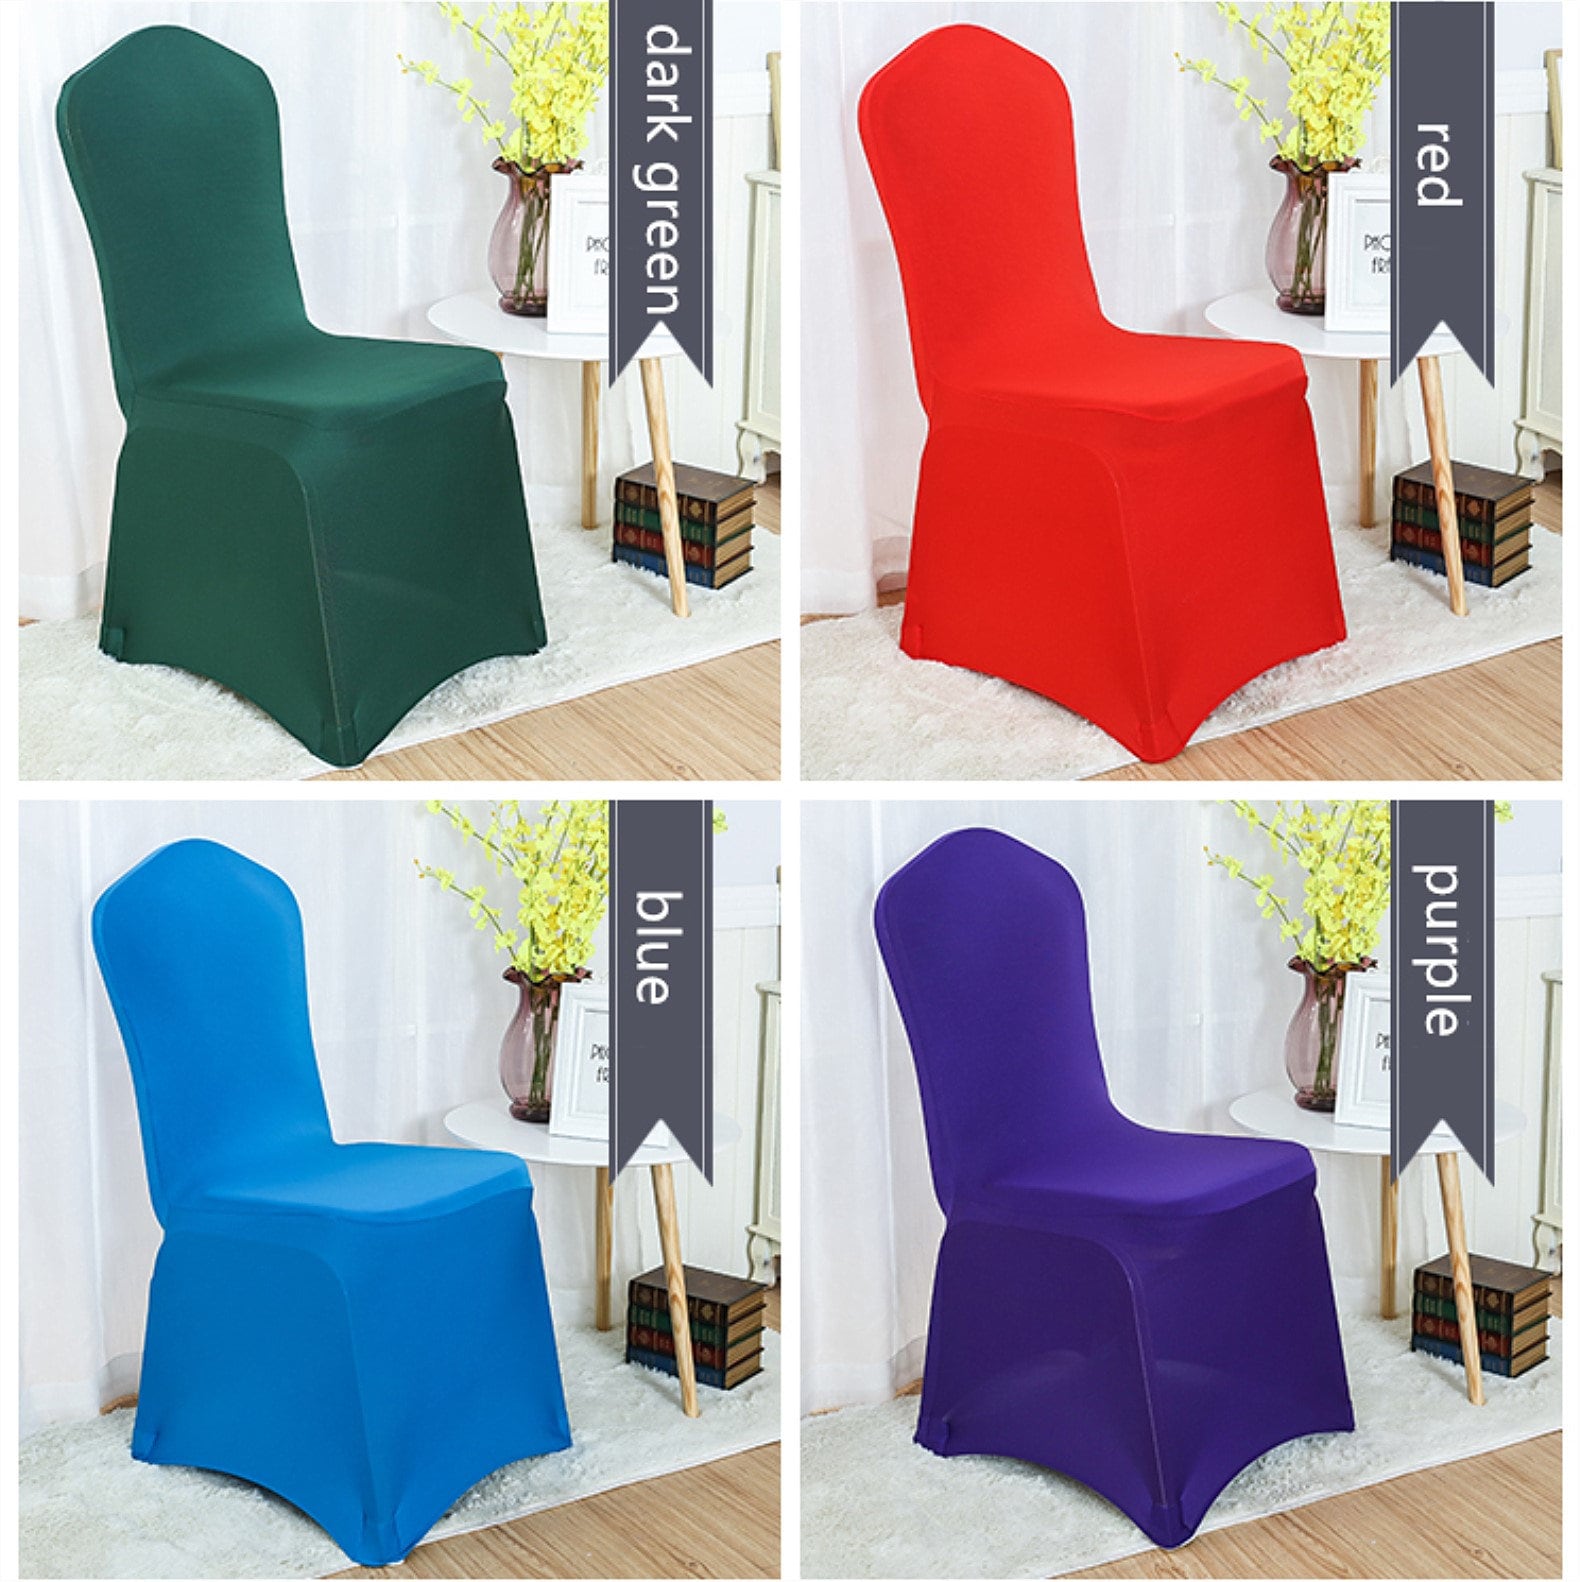 New 100PCS Spandex Lycra Chair Covers For Wedding Party Xmas Banquet Decor